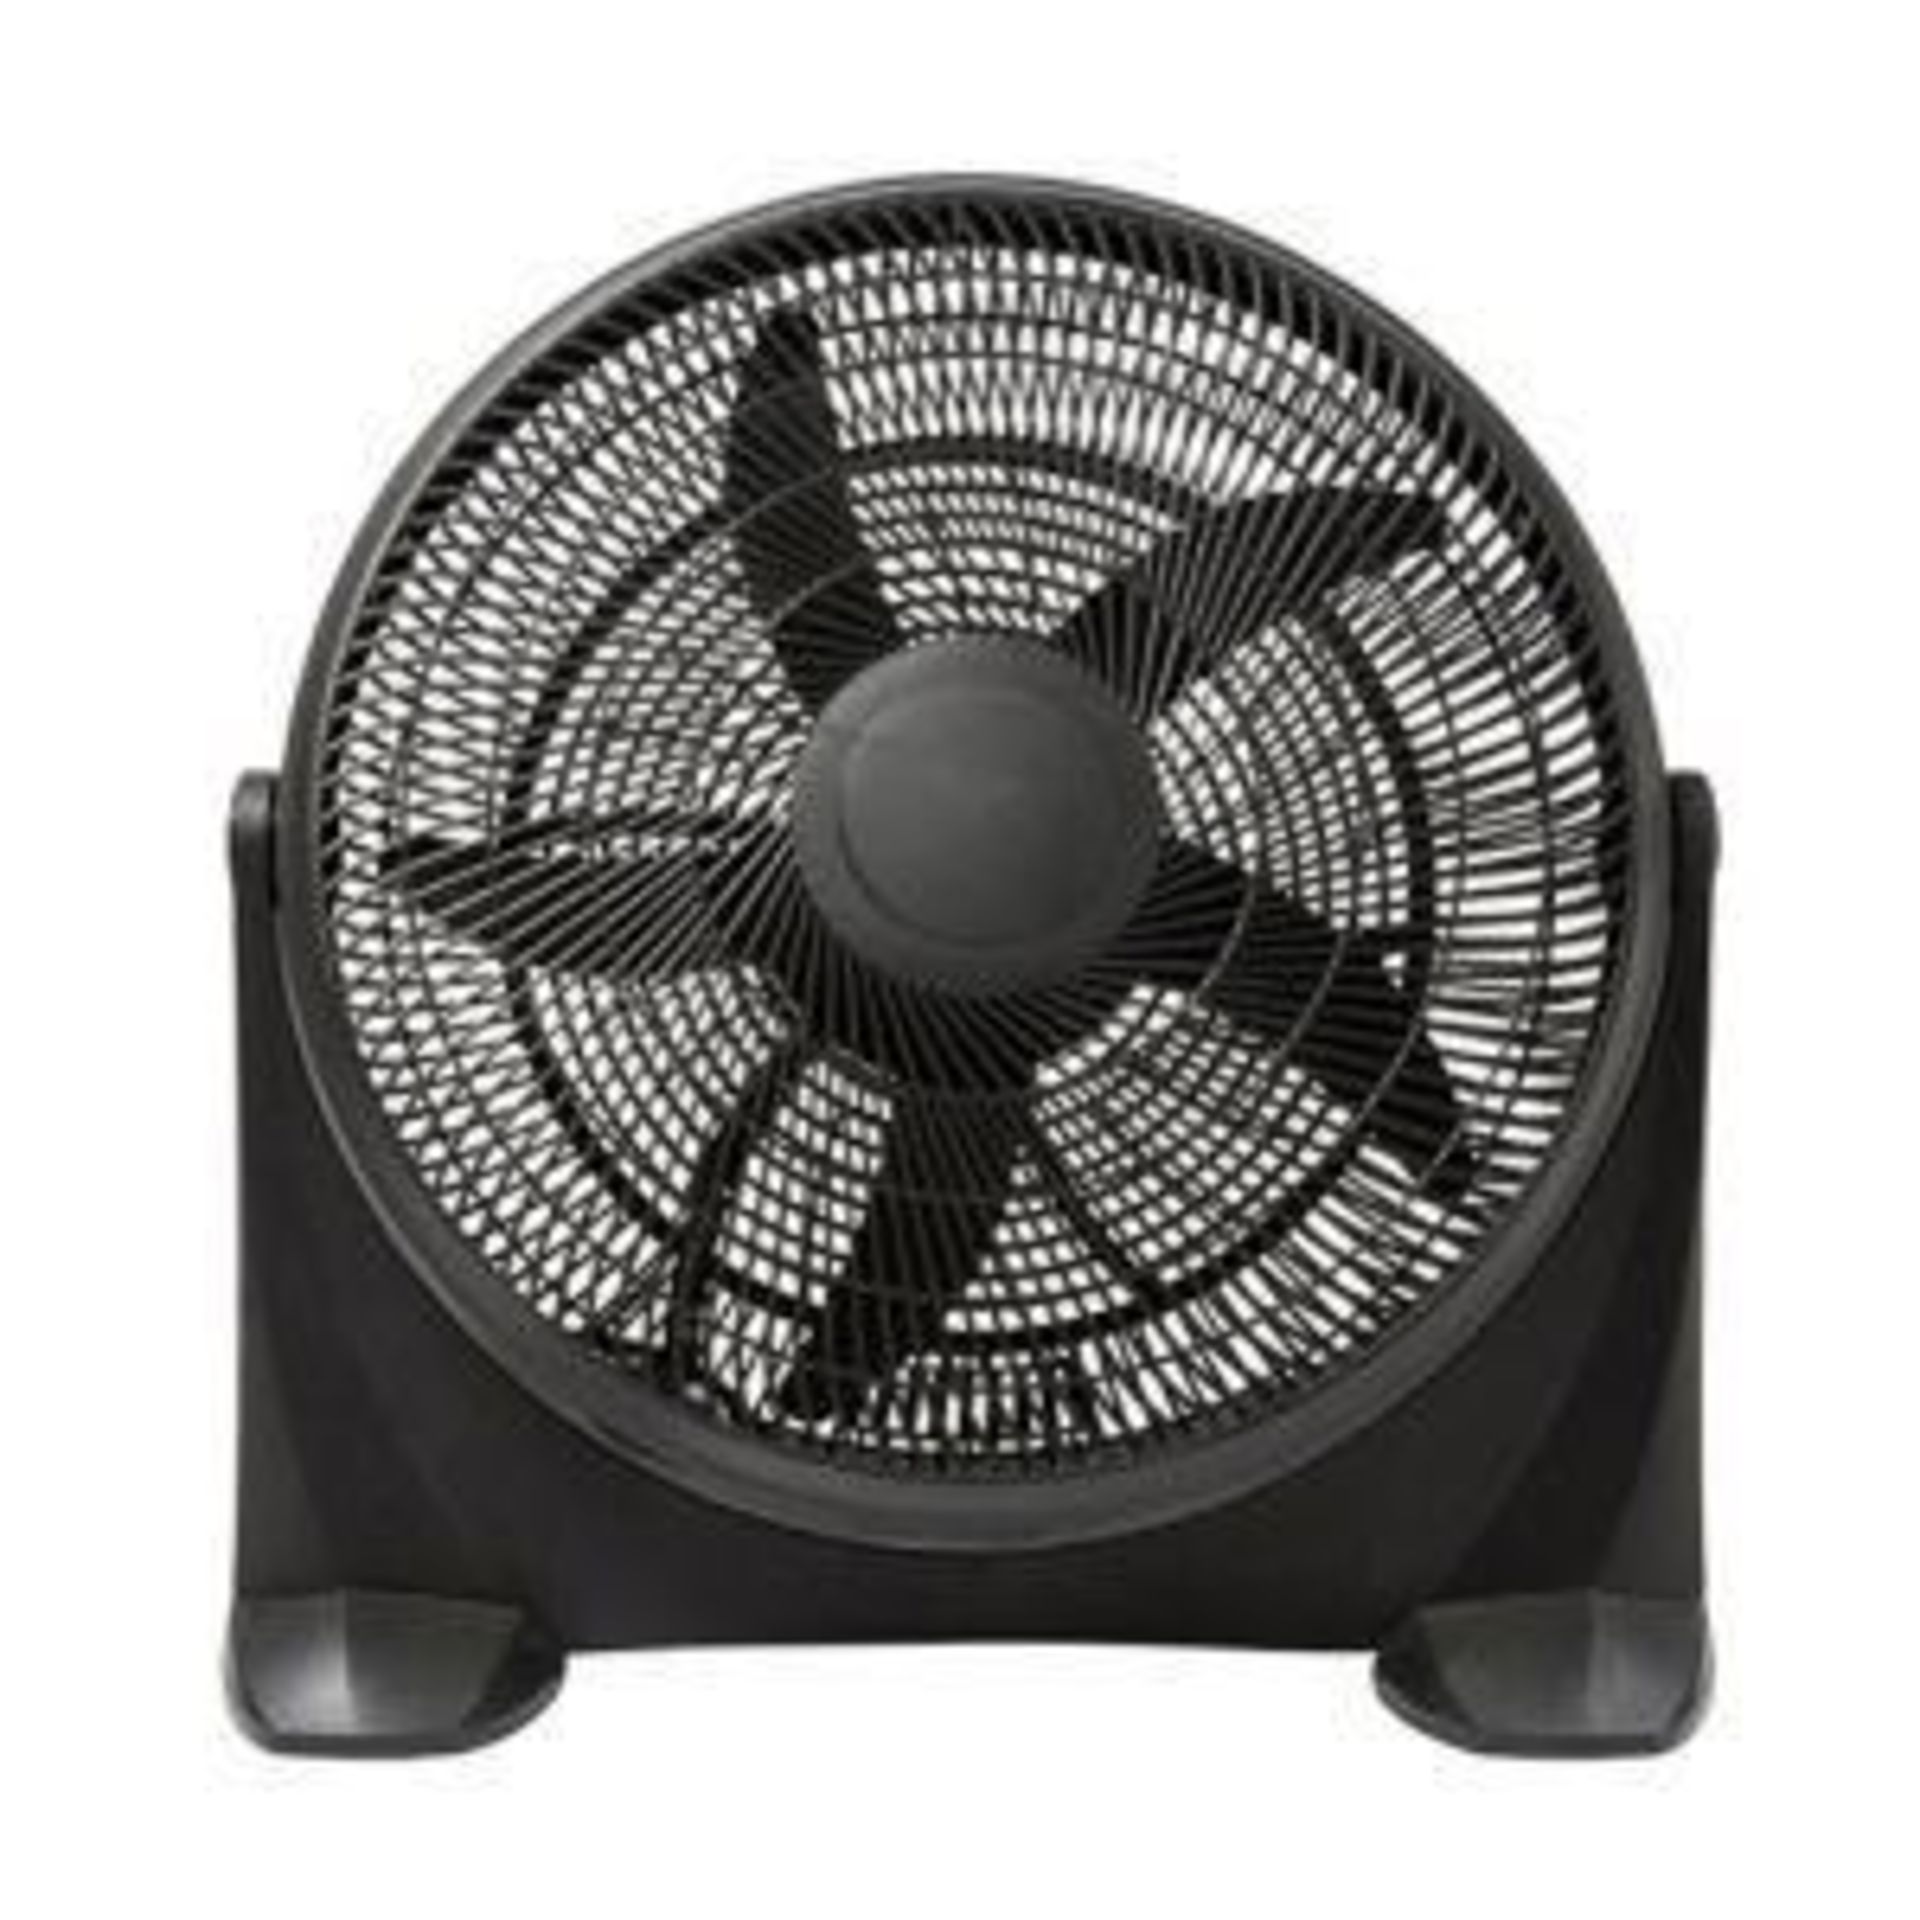 3 x Large 20" Box Fan, Black. - RRP £144 (LOCATION - H/S R 5.2) This floor fan will provide powerful